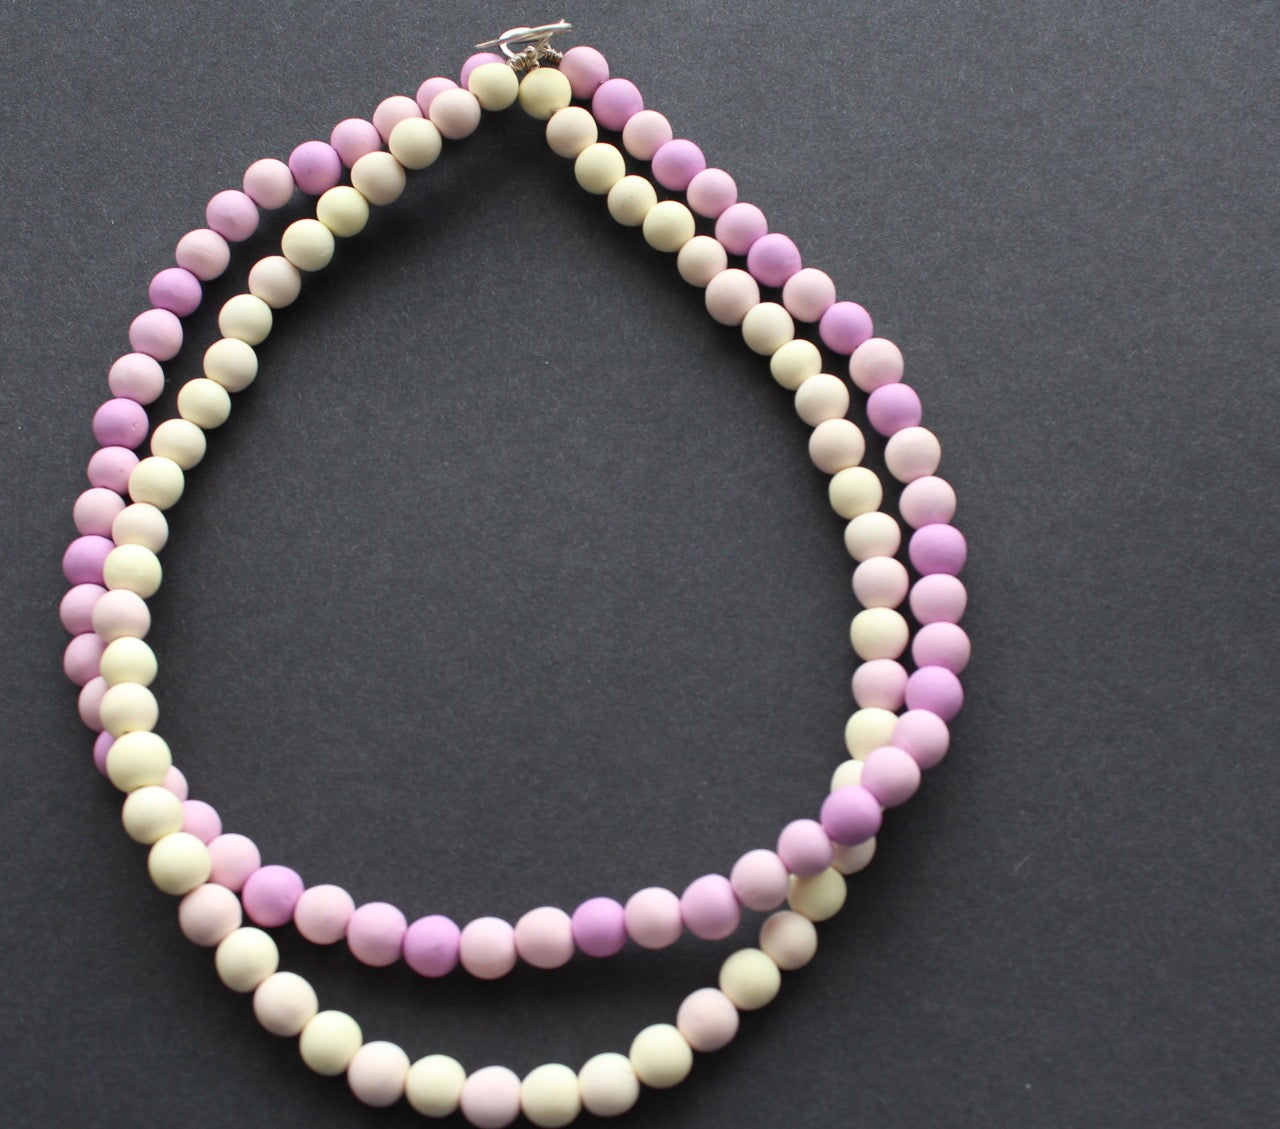 Clare Lloyd - Twisted small bead necklace palest lemon and pinks – The ...